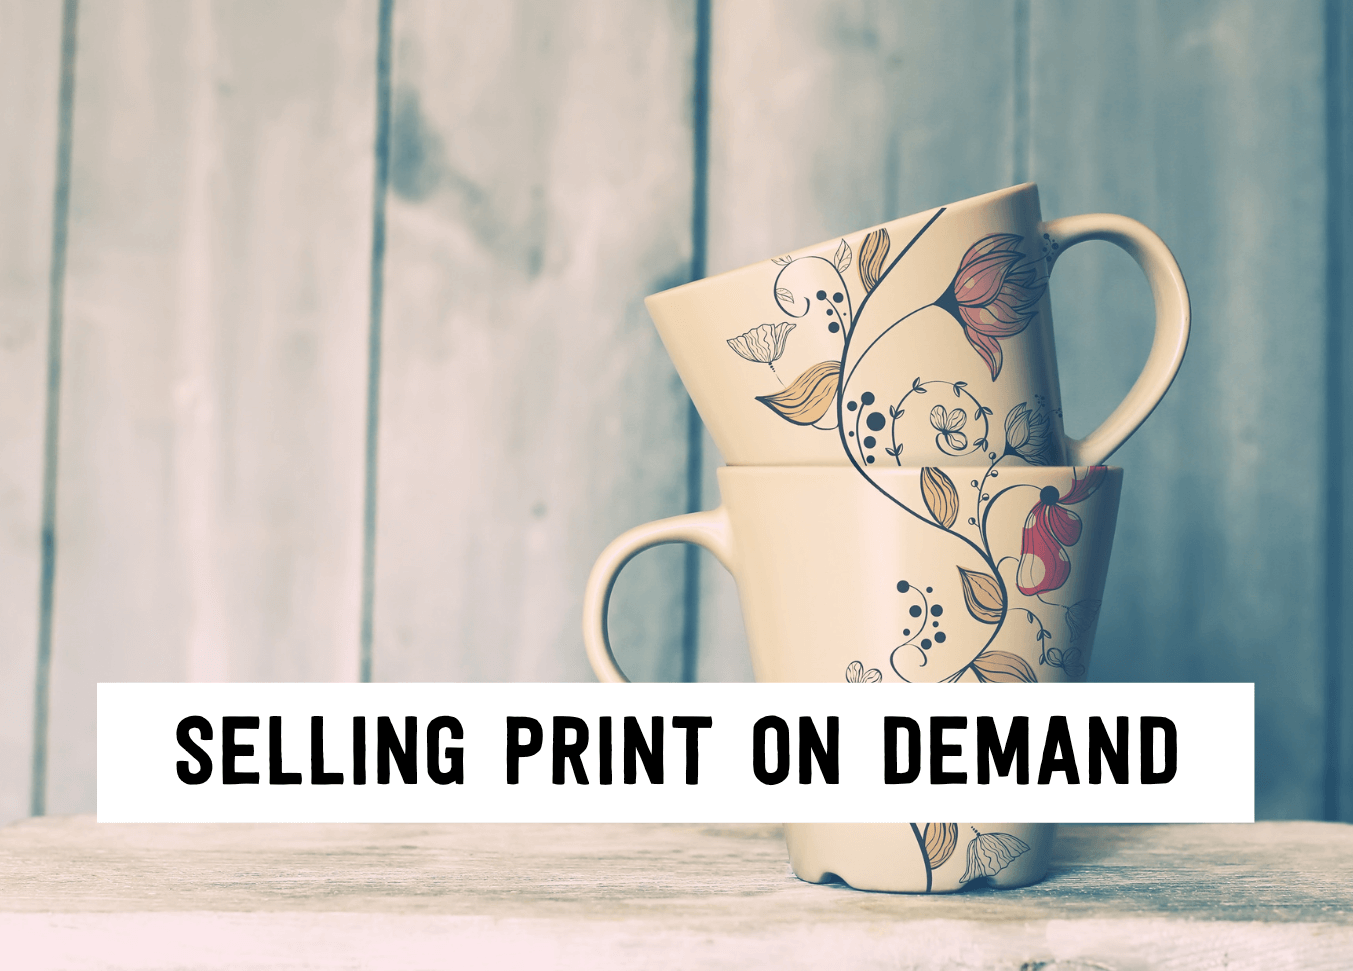 Selling print on demand | Tizzit.co - start and grow a successful handmade business